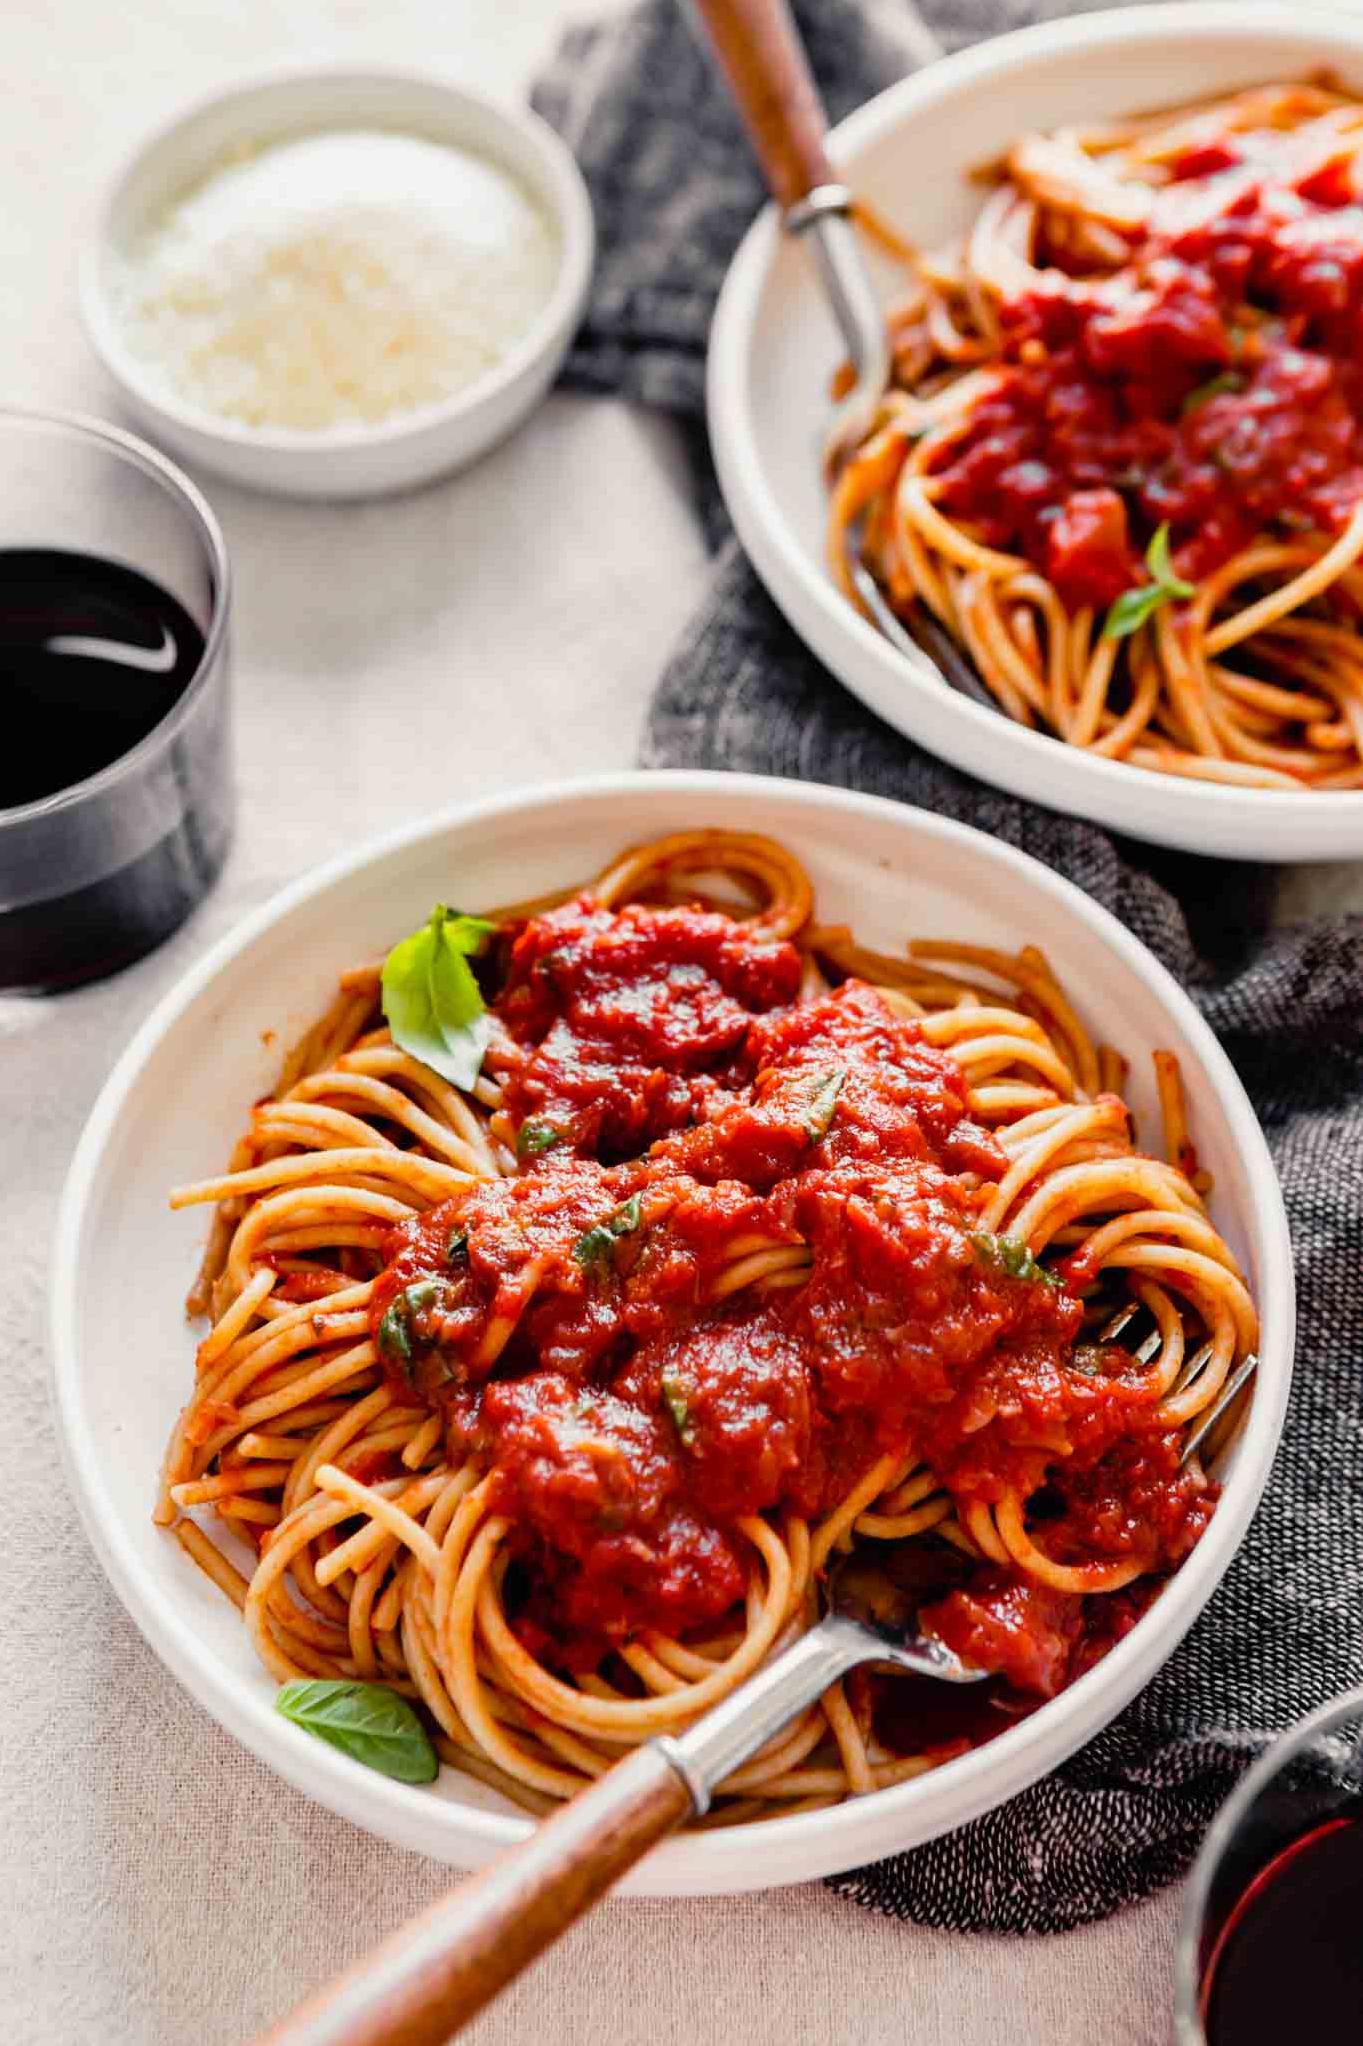  Simply pour a glass of red for yourself and one for the pasta sauce